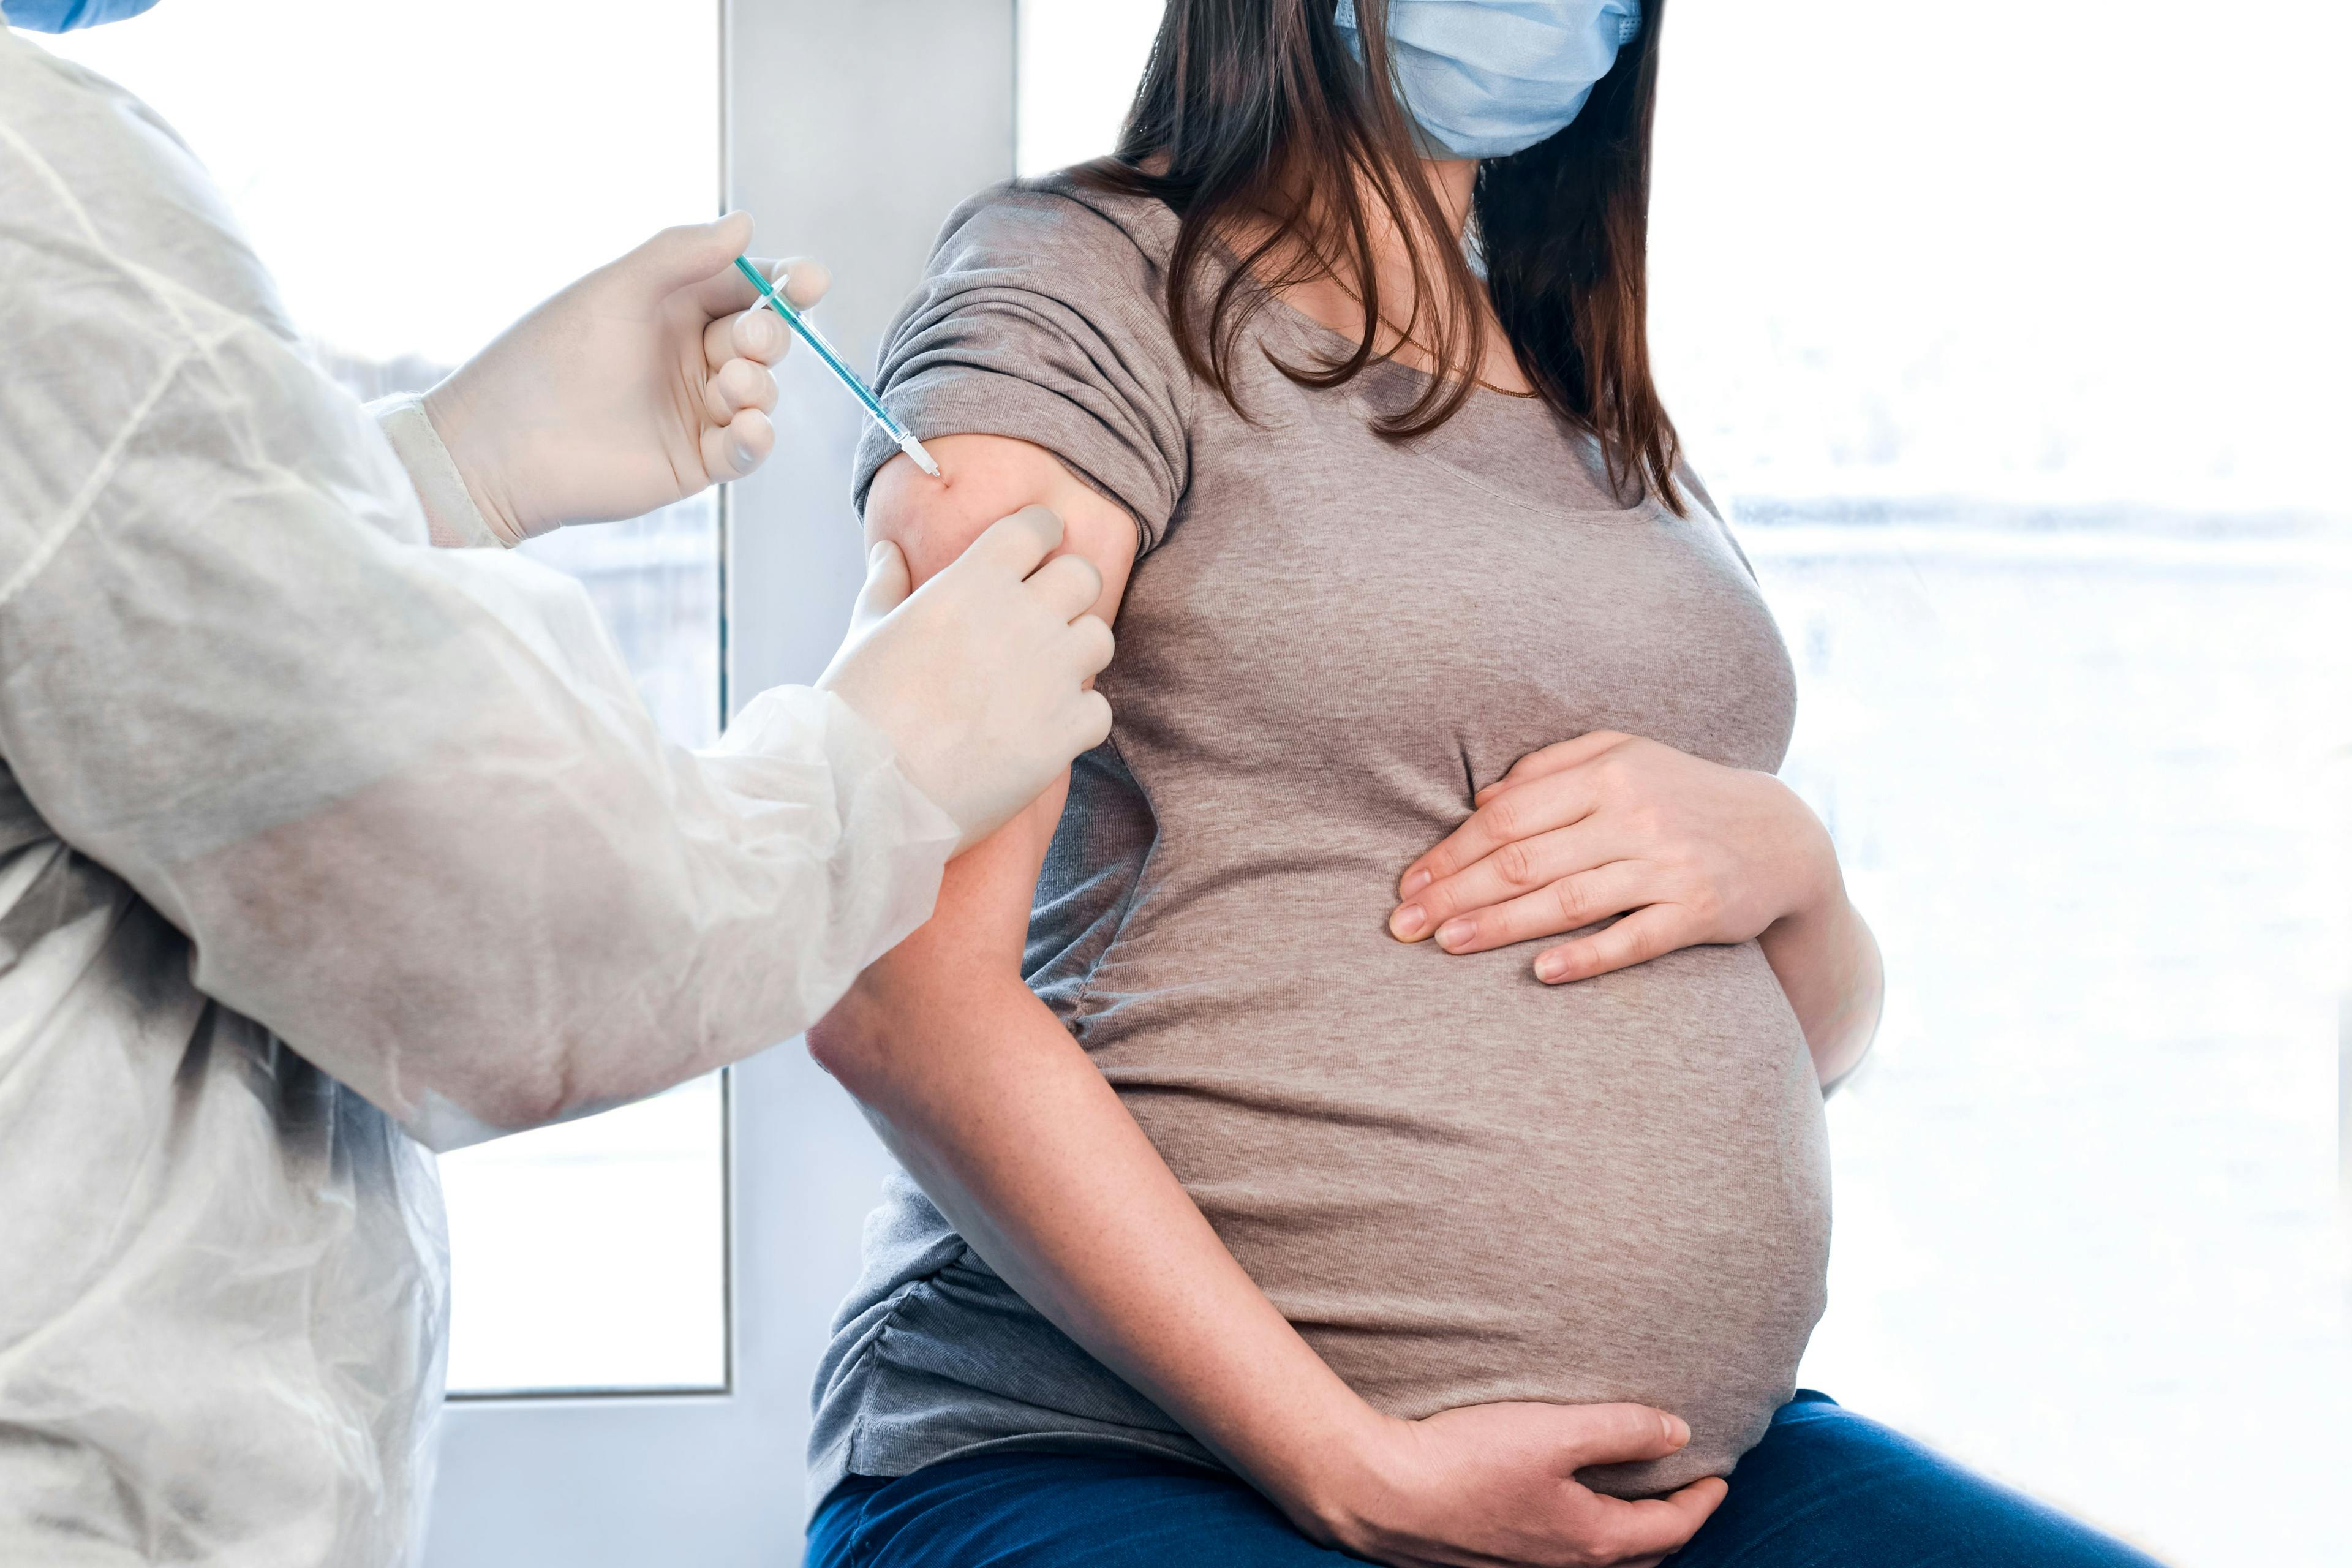 Maternal RSV Vaccination Not Associated With Increased Preterm Birth Risk